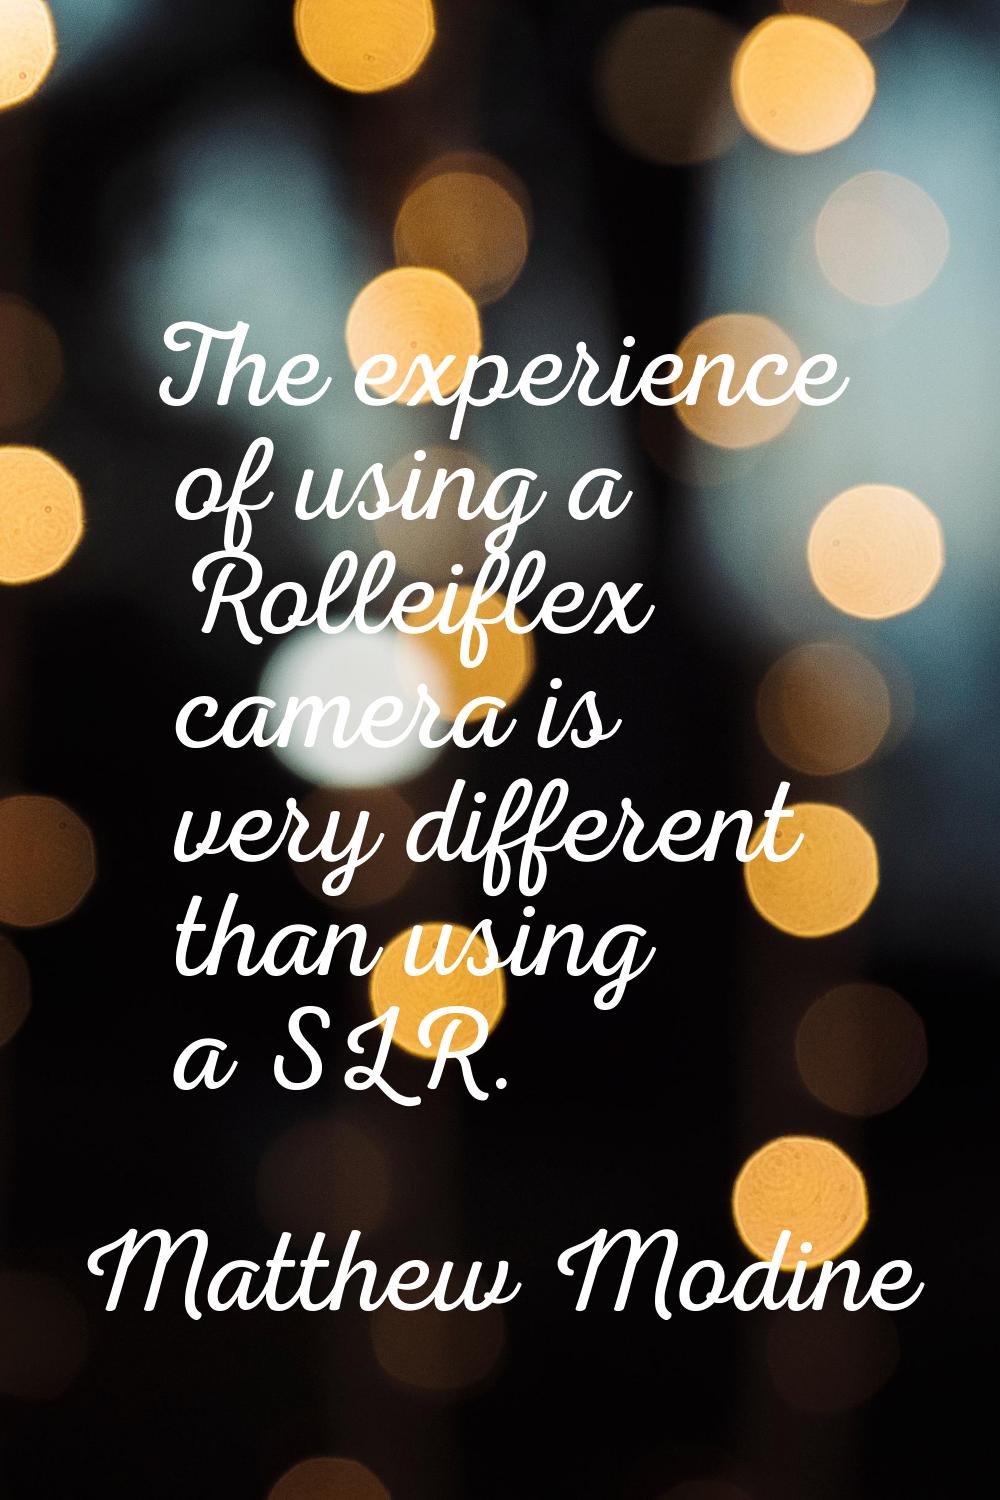 The experience of using a Rolleiflex camera is very different than using a SLR.